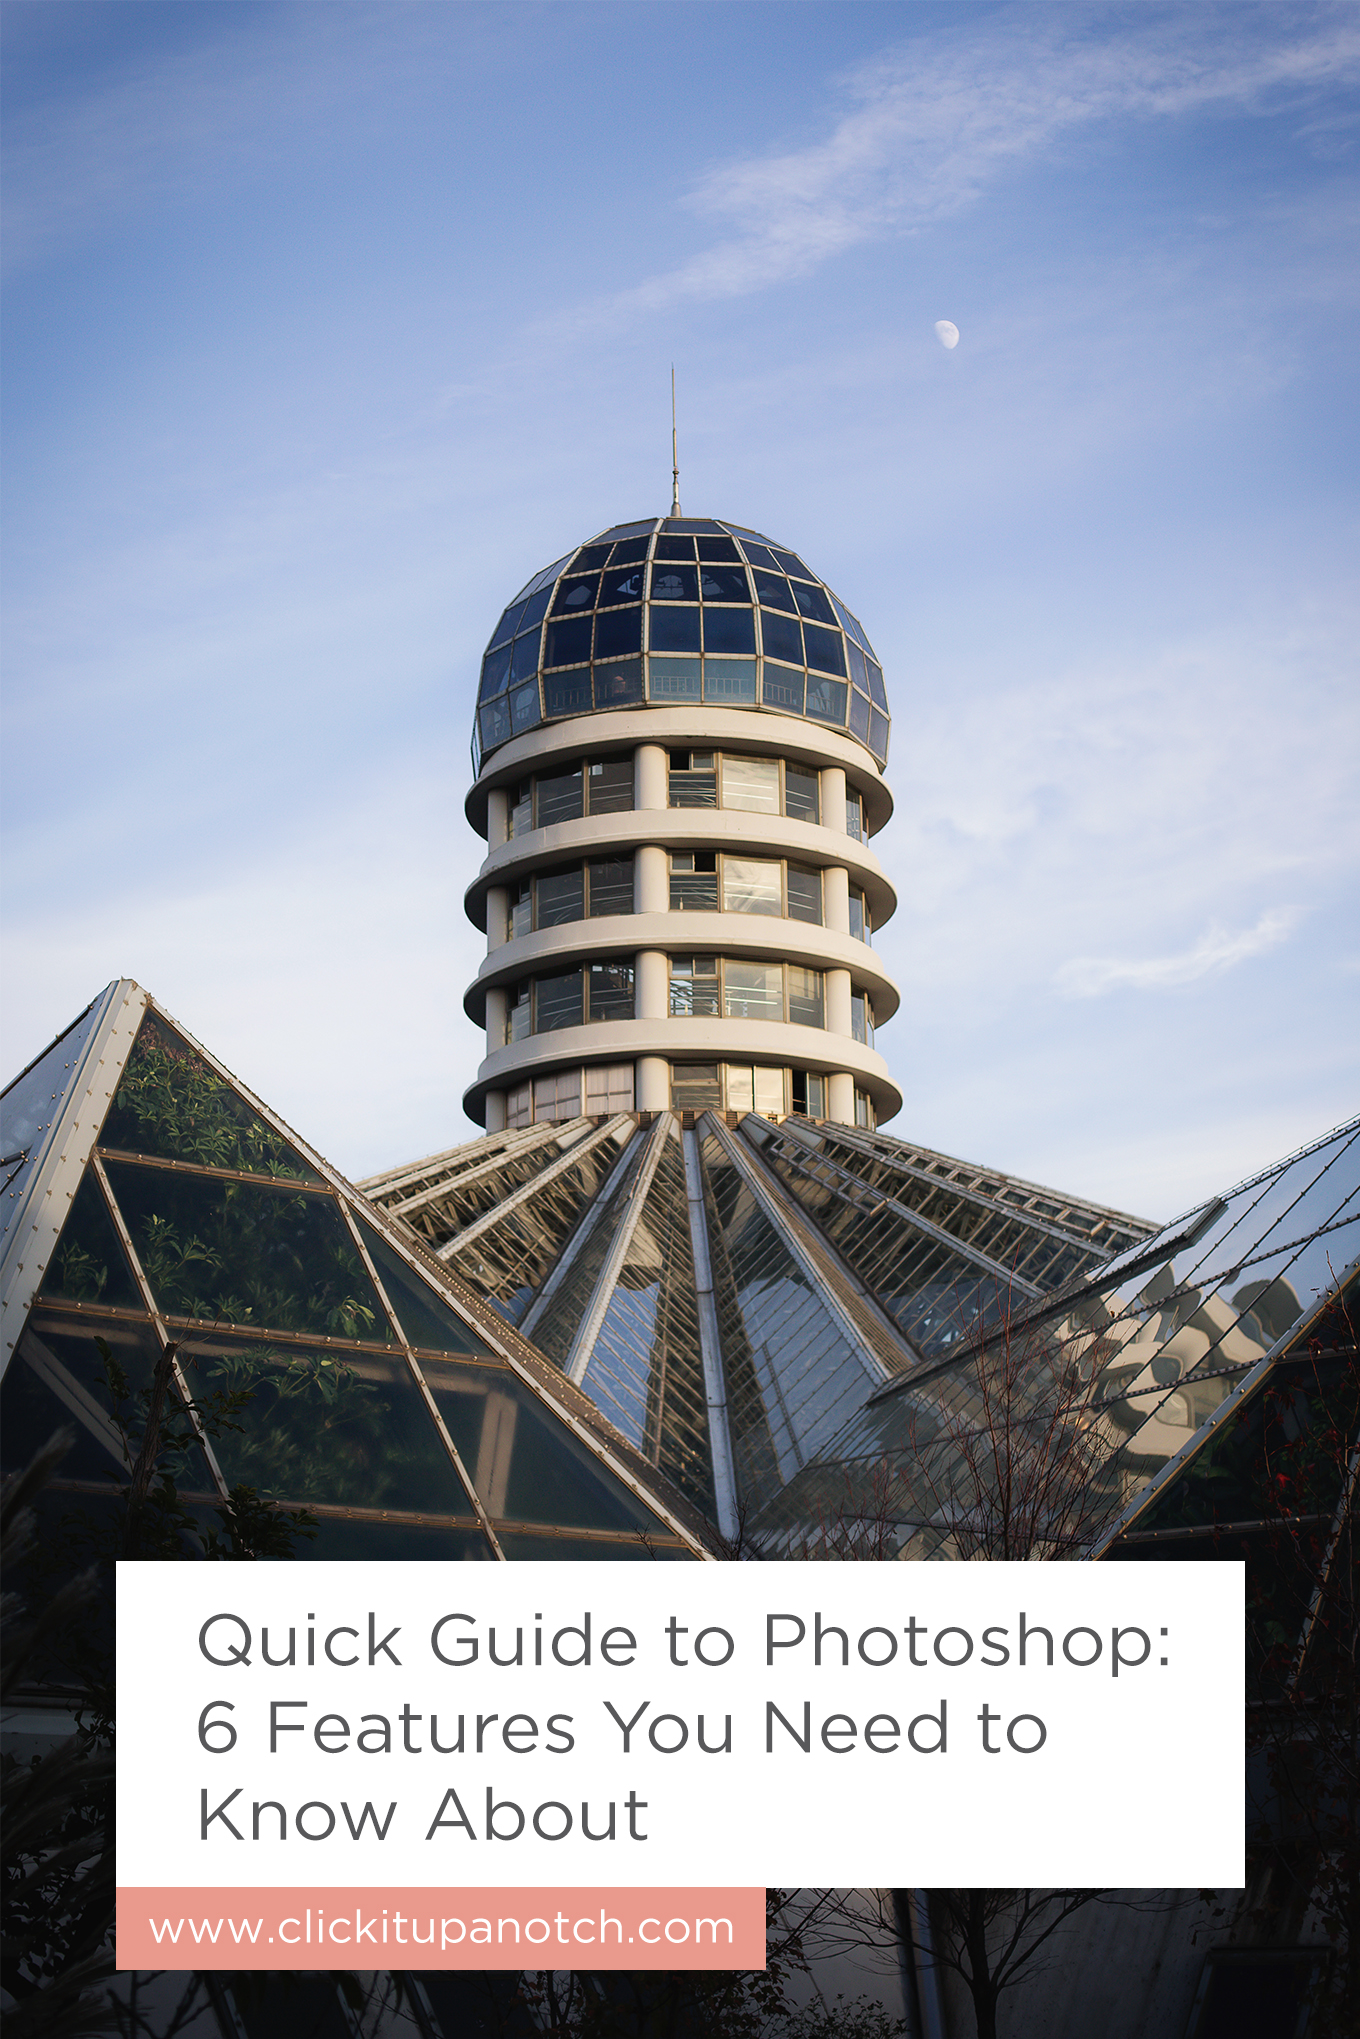 Photoshop can be so intimidating, but this is a great place to start! Read - "Quick Guide to Photoshop: 6 Features You Need to Know About"